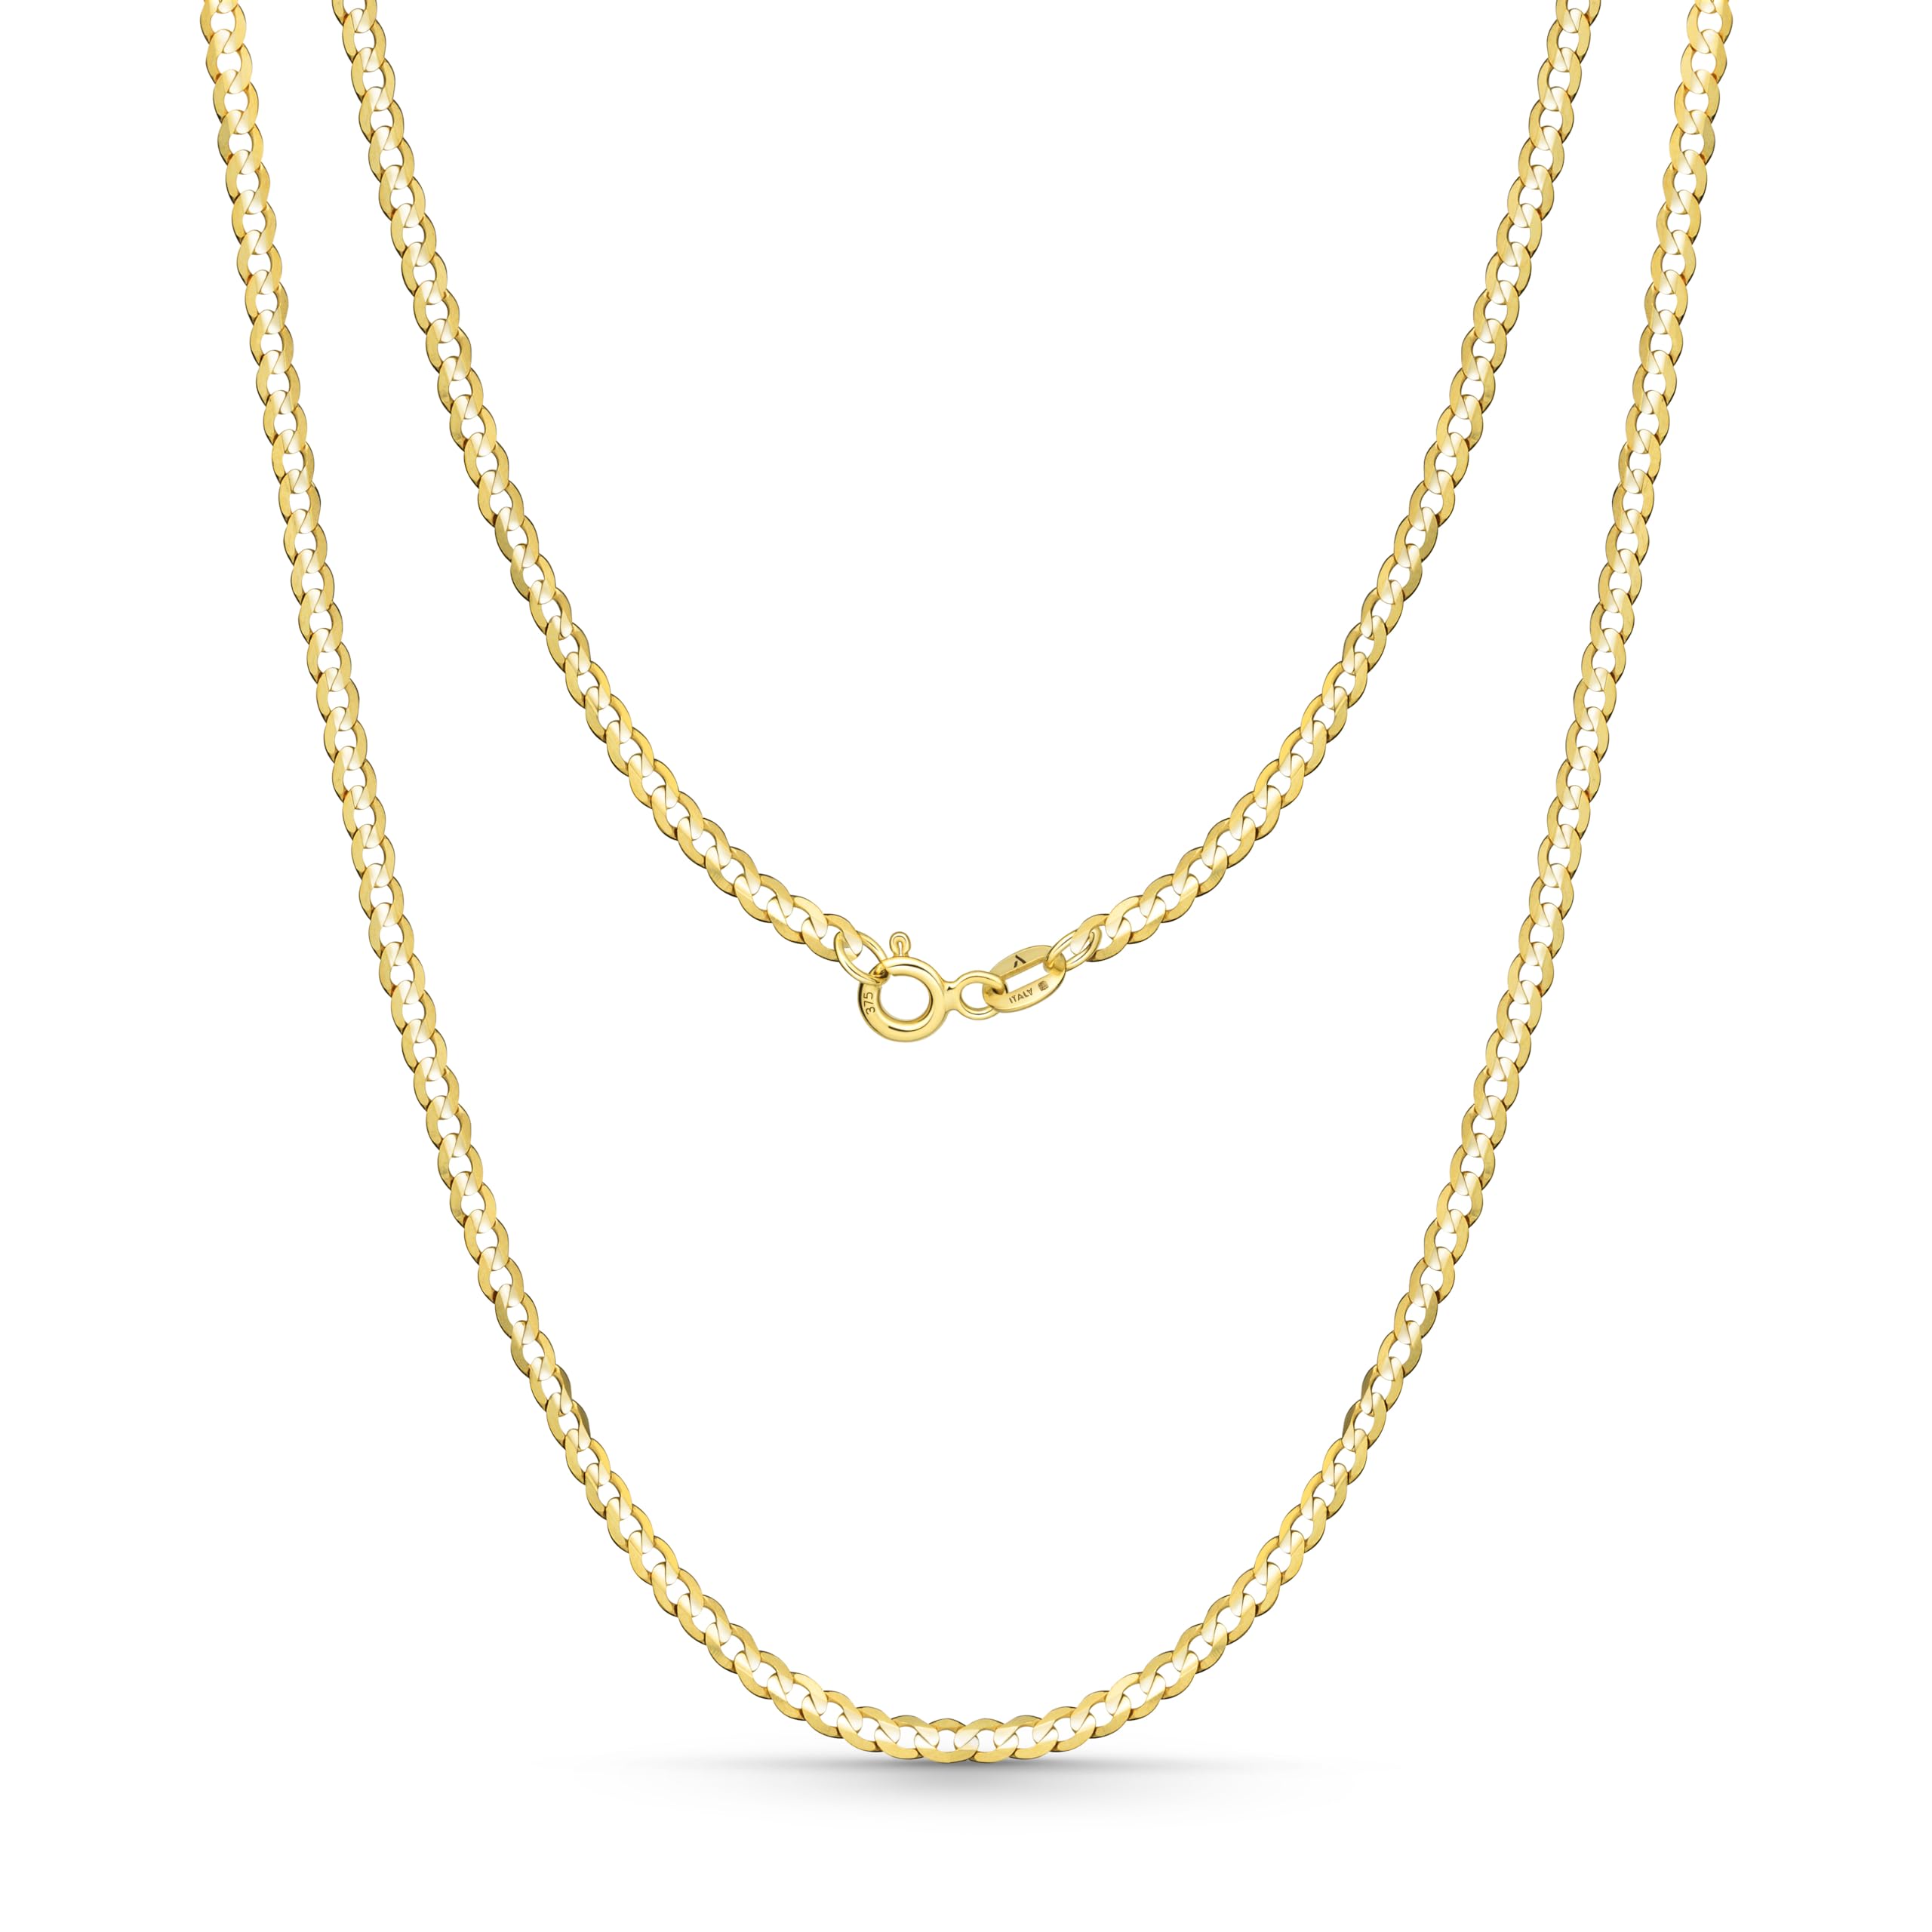 Promotions Amberta Allure Collier en Or 9 Carats pour F